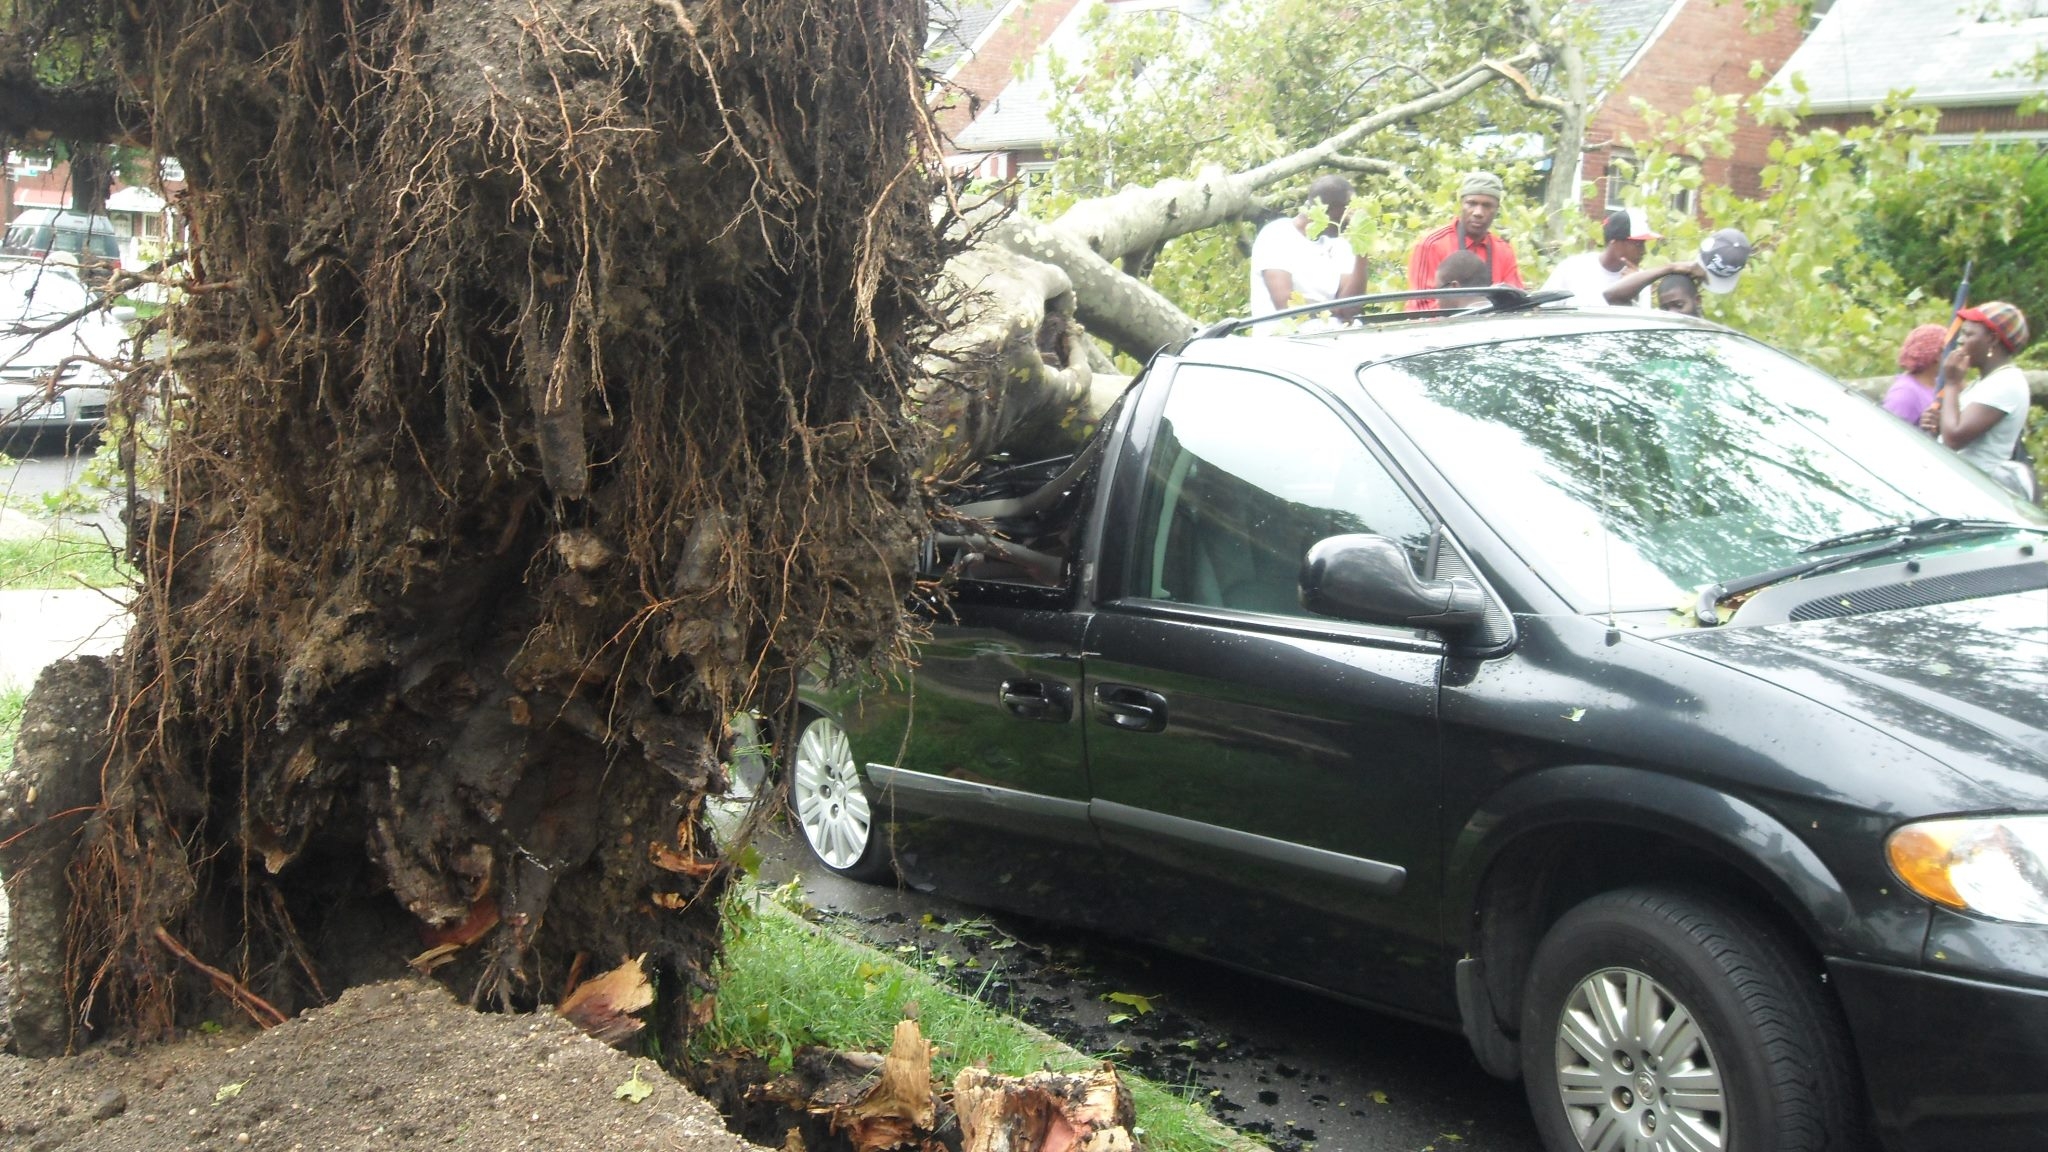 the-tree-that-fell-in-our-block-and-crushed-my-neighbors-car-credit-facebook-fan-pic-by-jasmin-c-van-brackle.jpg 